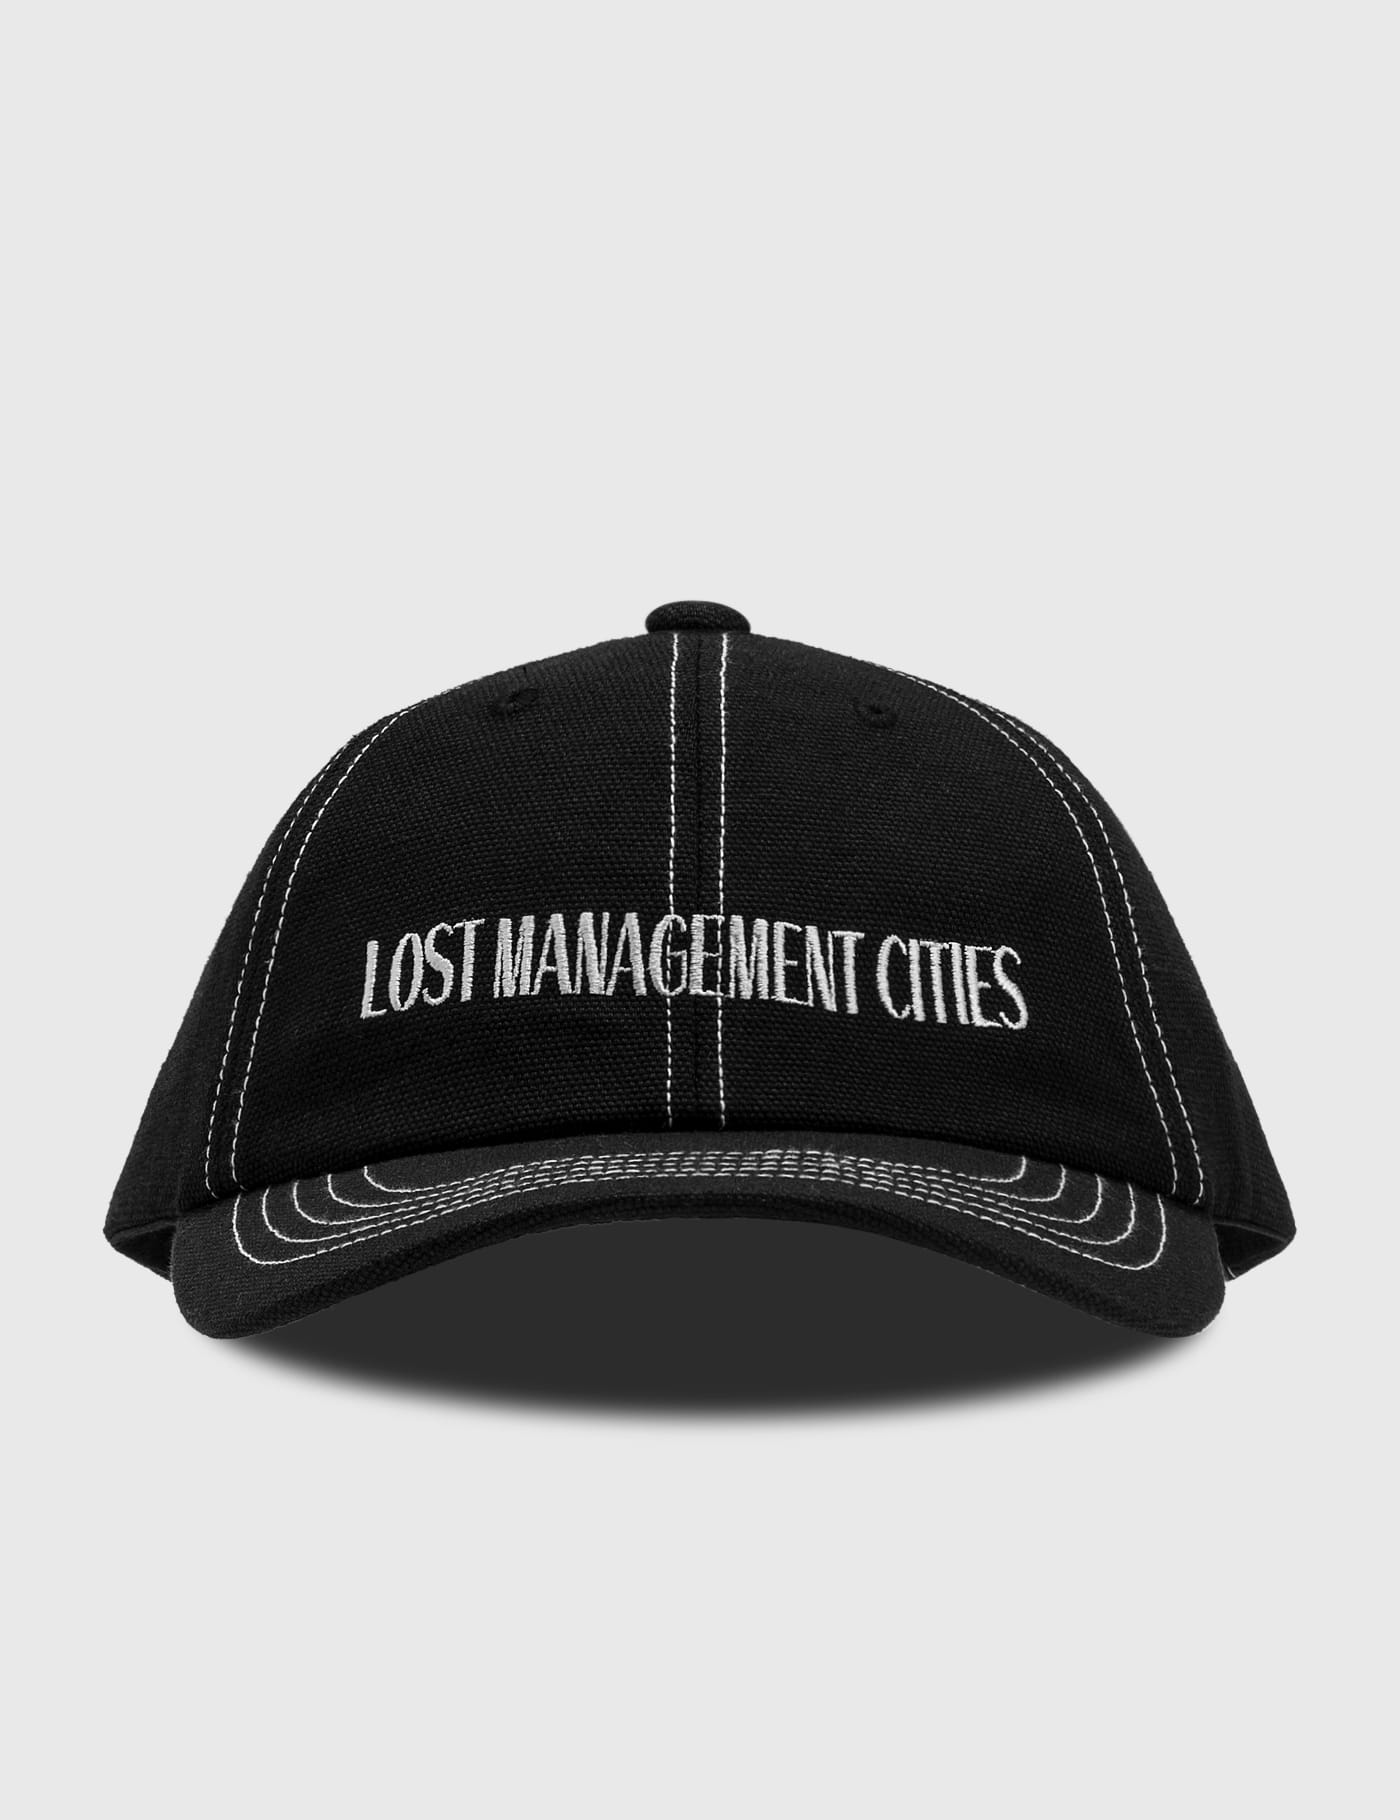 LMC - Lmc Contrast Stitch Canvas 6 Panel Cap | HBX - Globally Curated  Fashion and Lifestyle by Hypebeast